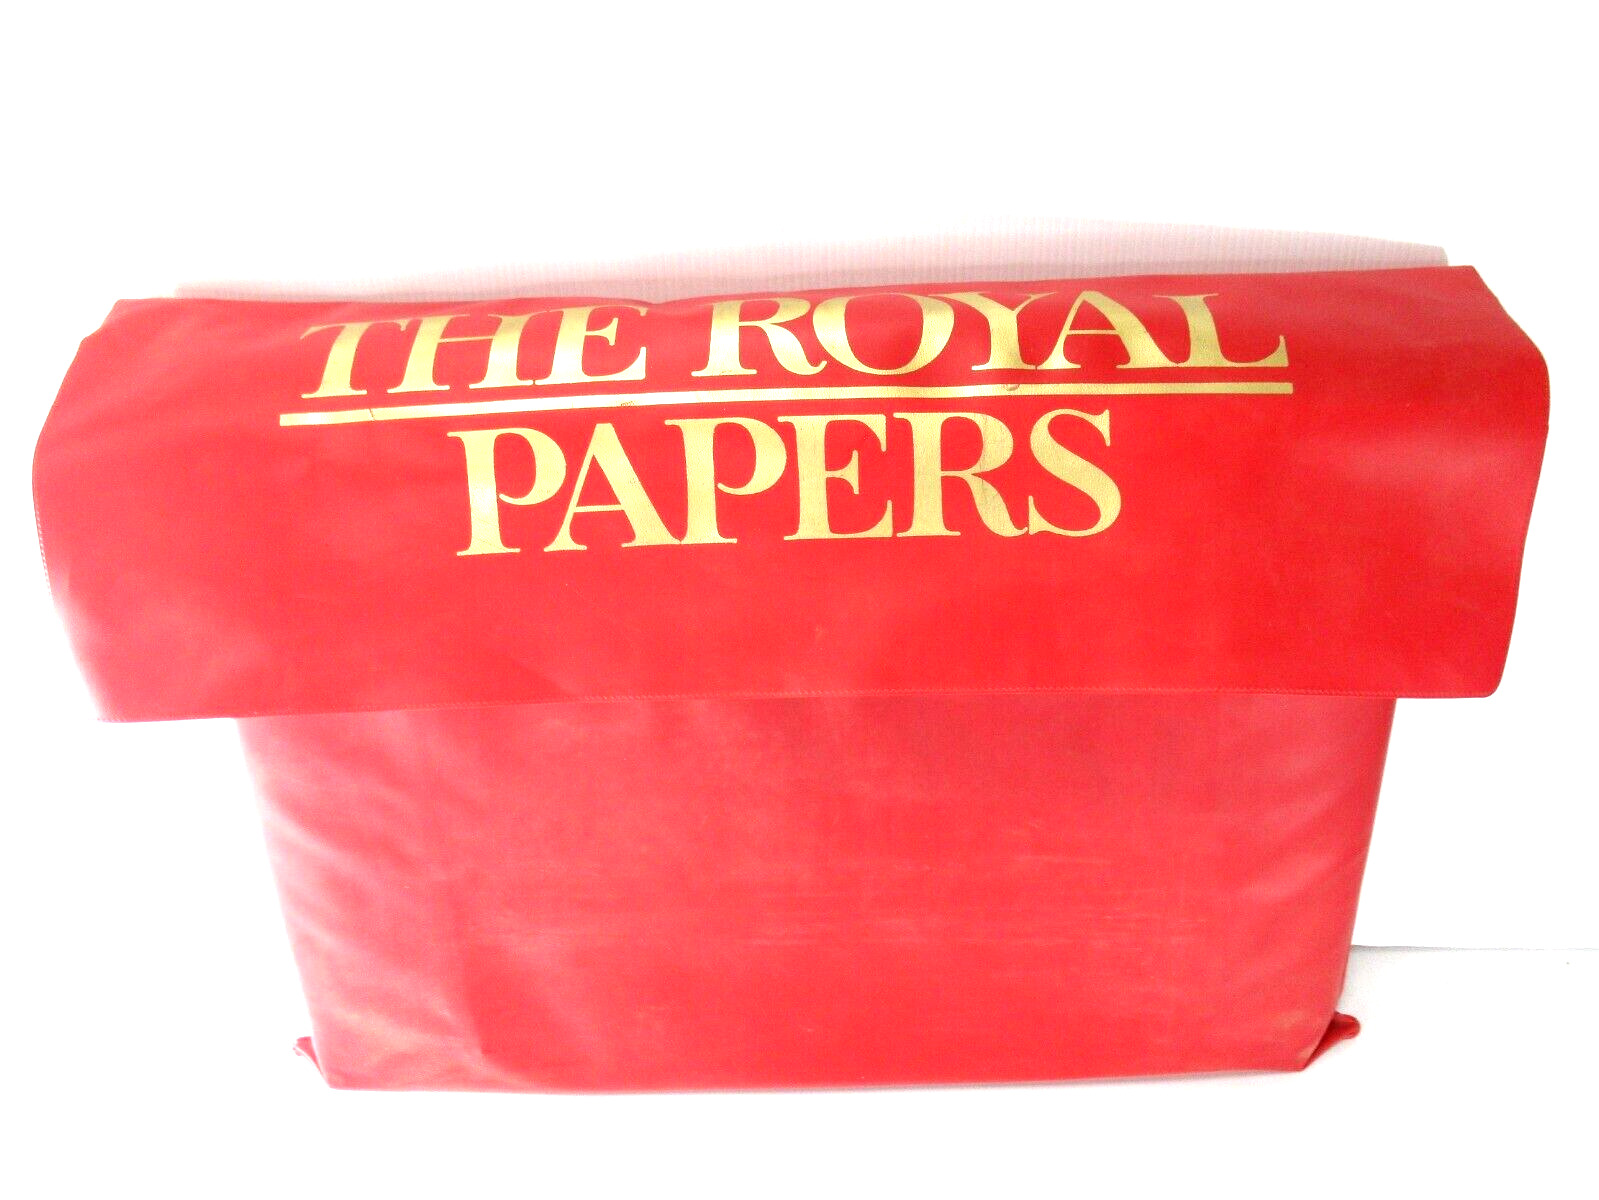 The Royal Papers Issues Part 1- Part 54 Newspapers with Original Folder 1977 VGC